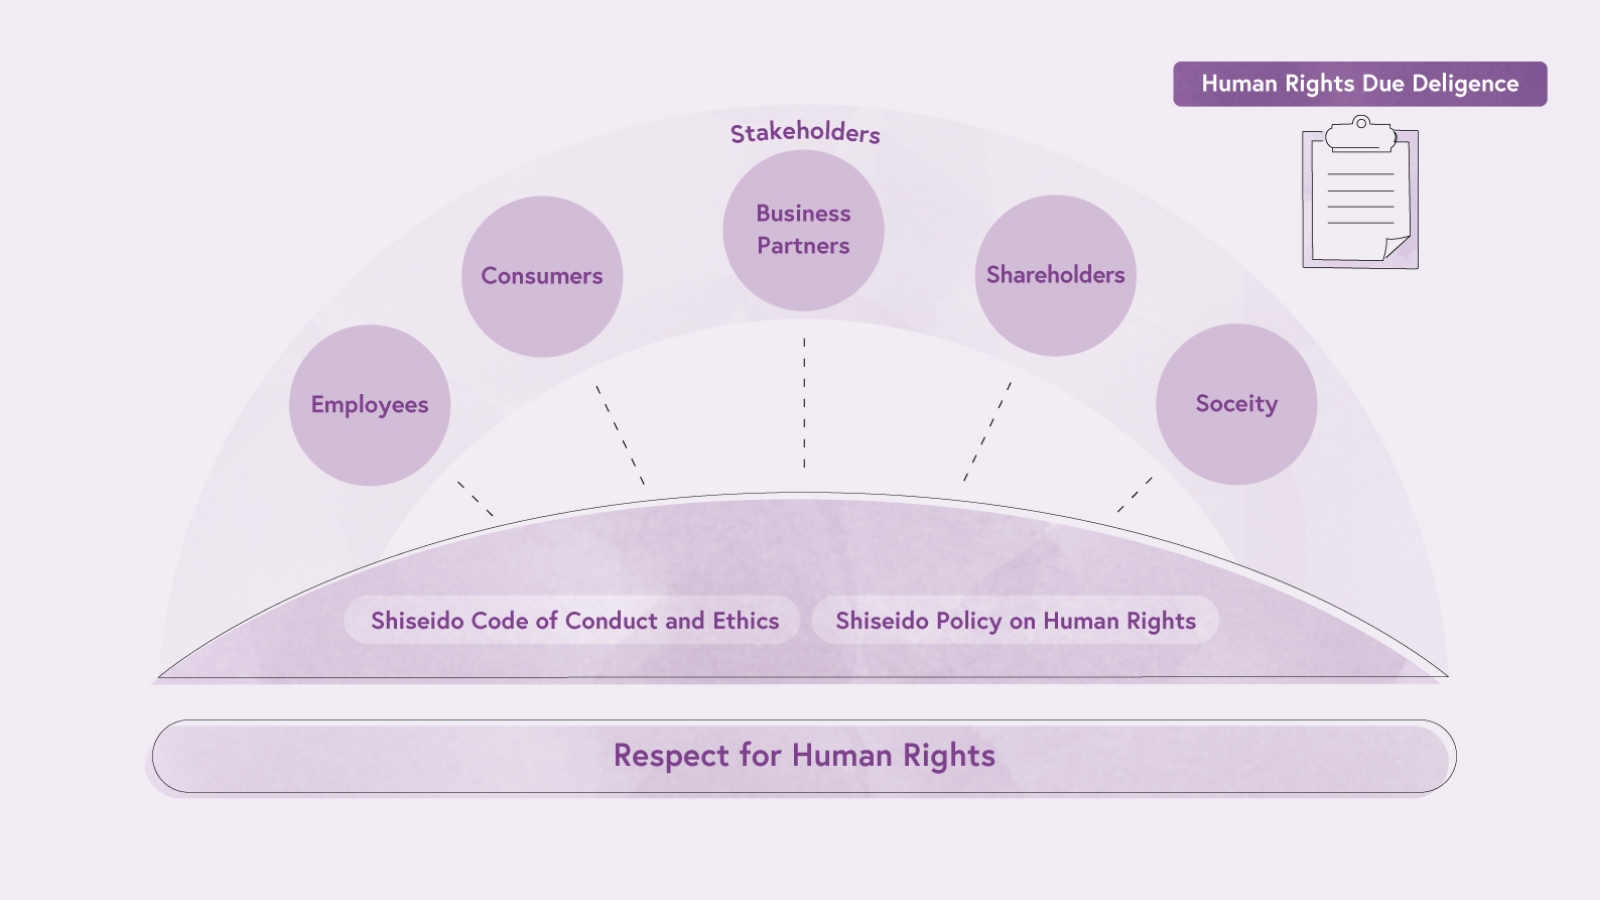 Respecting Human Rights